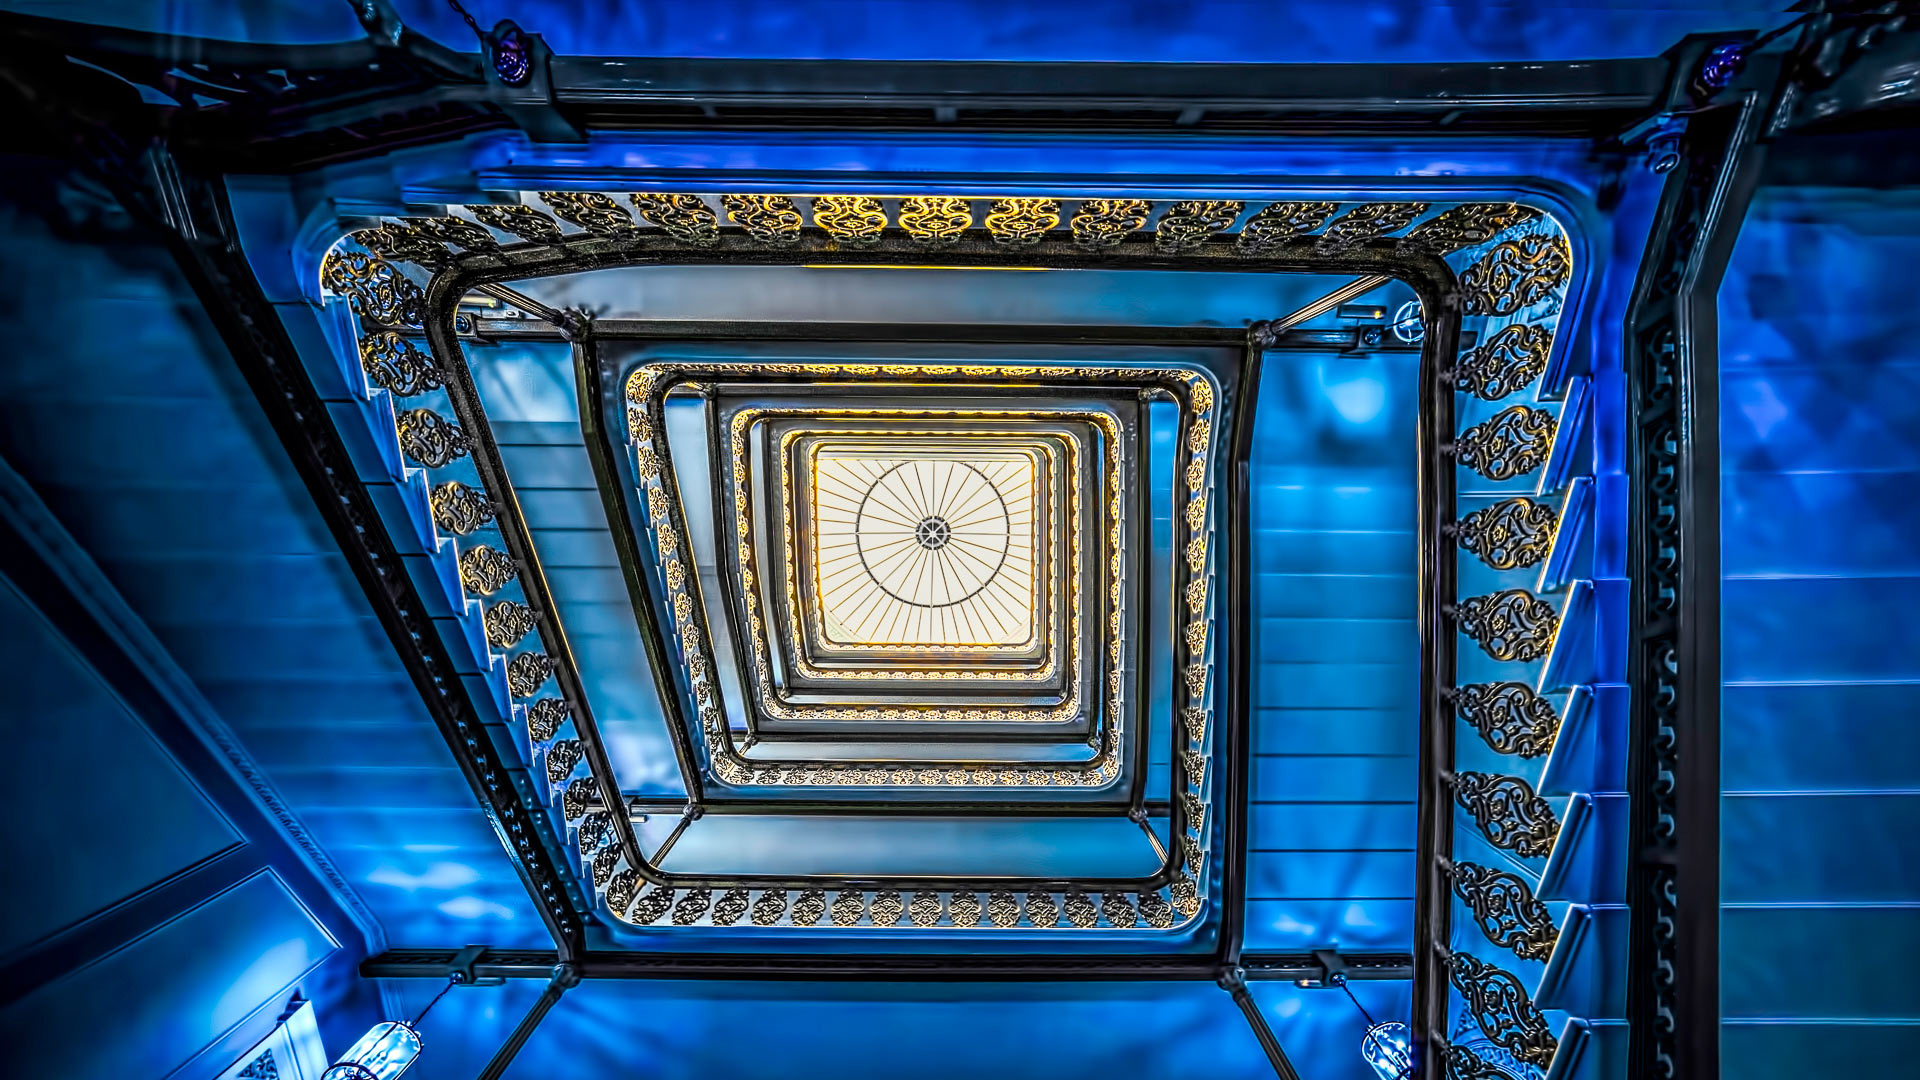 Lights Blue Ladders Stairs Architecture Railings Bottom View Light Bulb Staircase The Grand Brighton 1920x1080